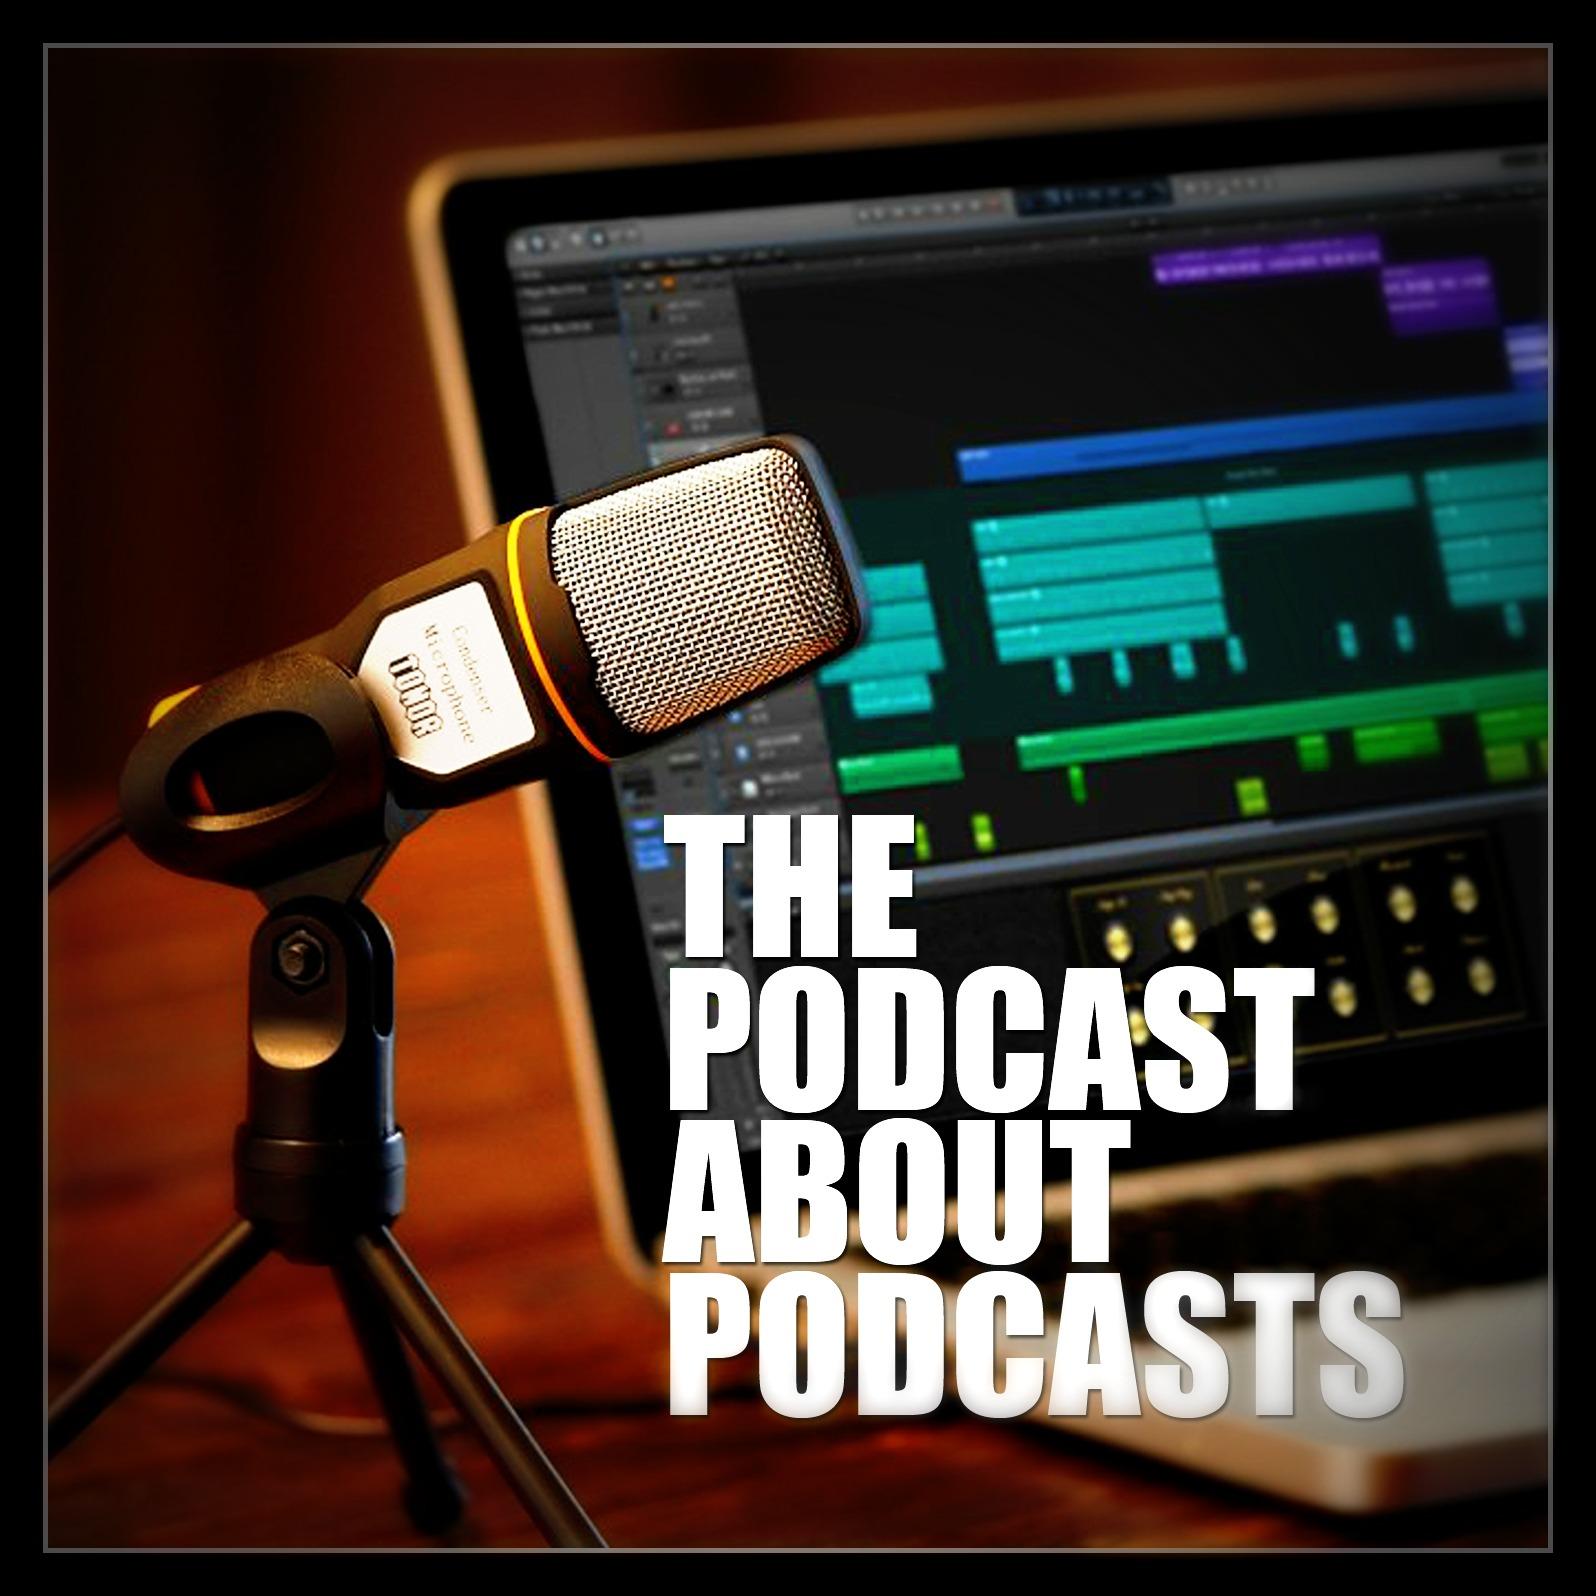 The Podcast About Podcasts